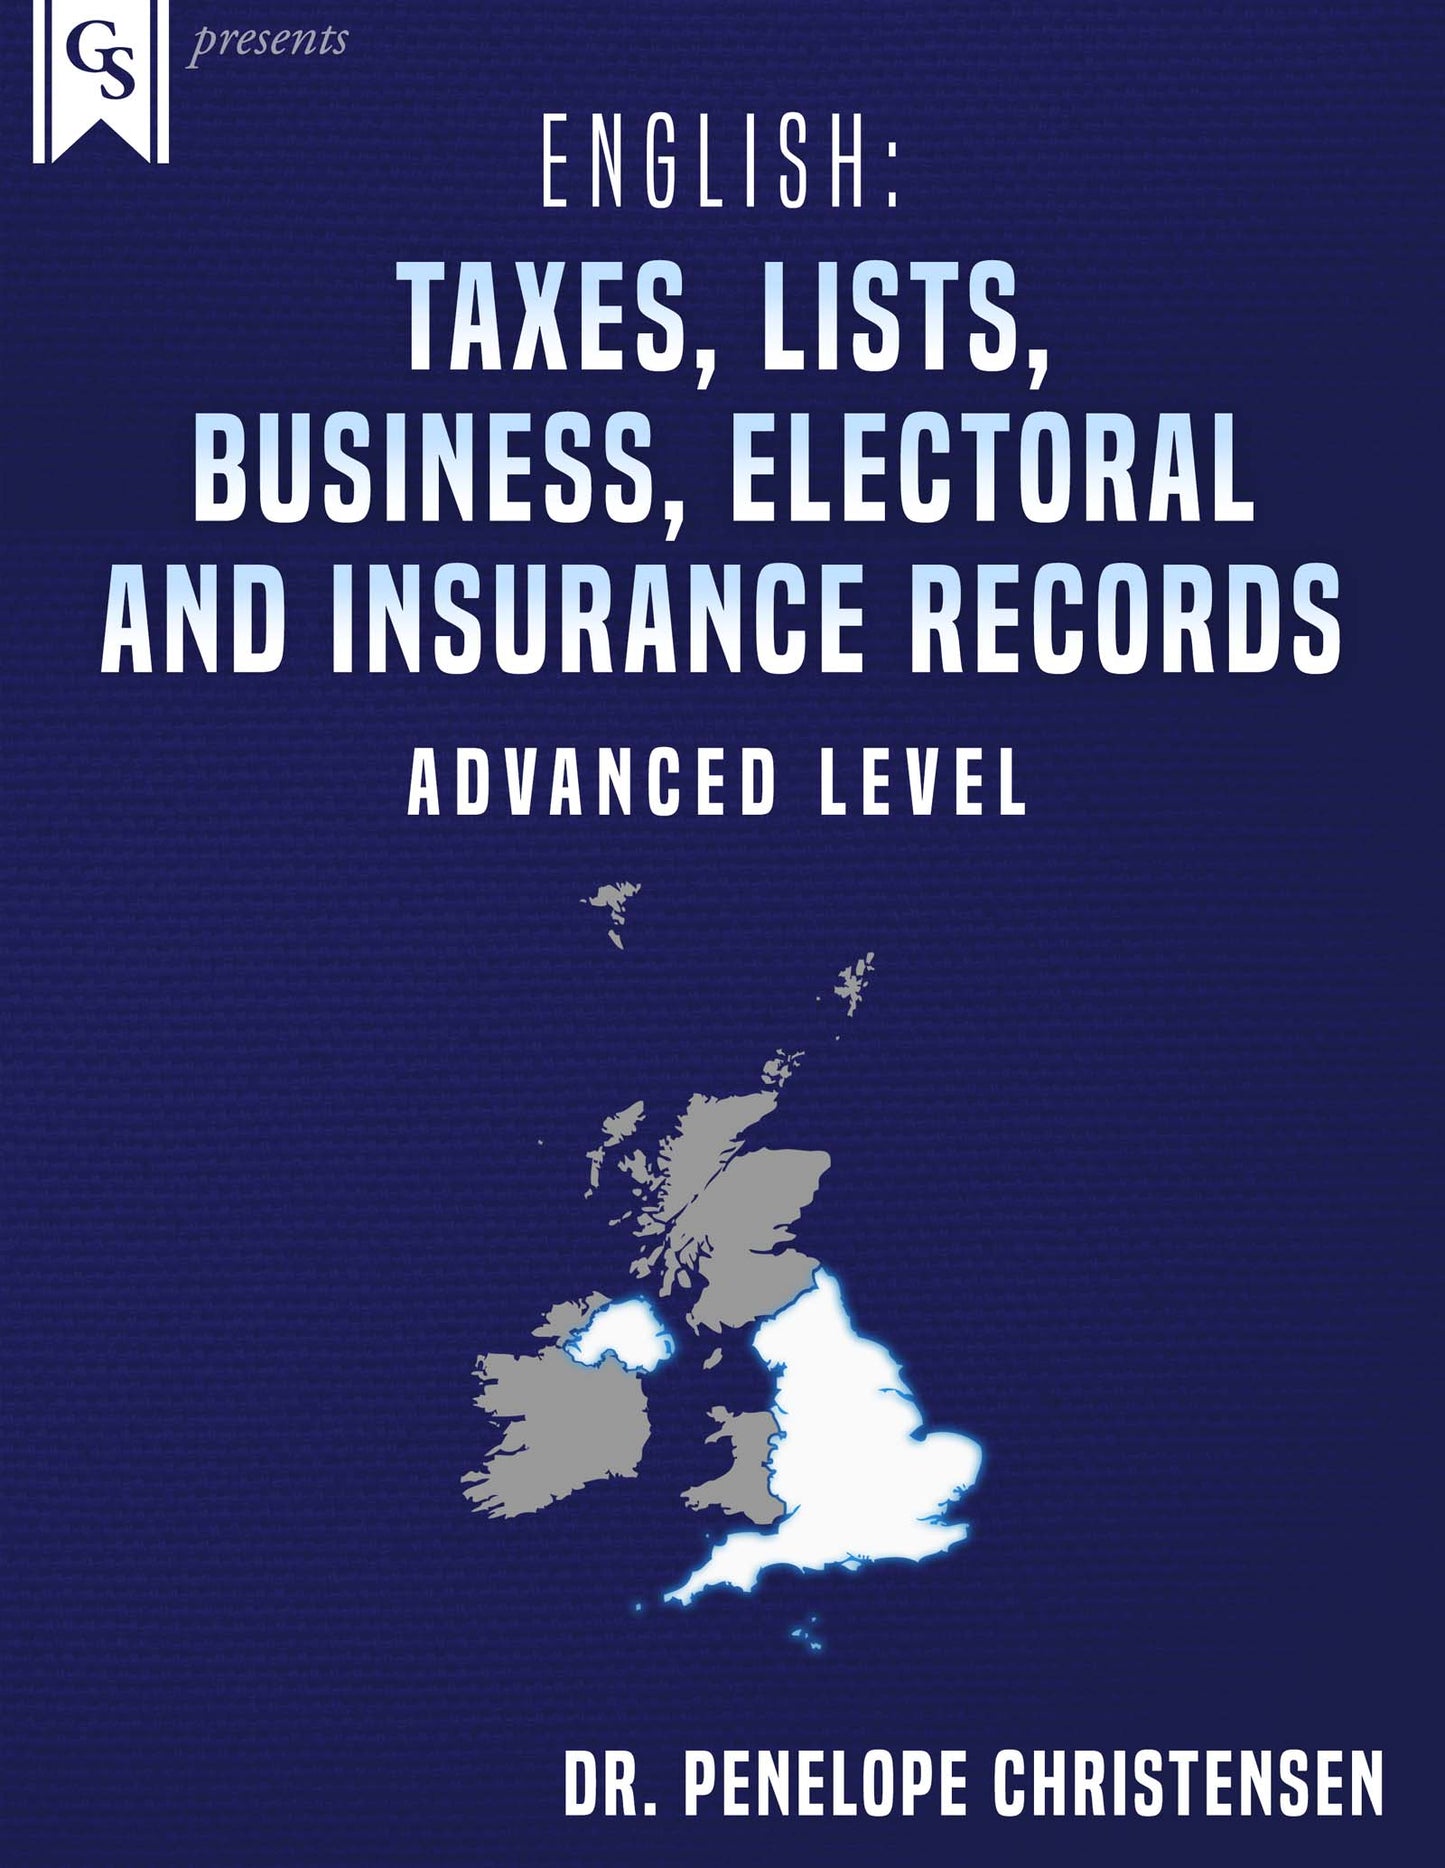 Printed Course Material-English: Taxes, Lists, Business and Insurance Records